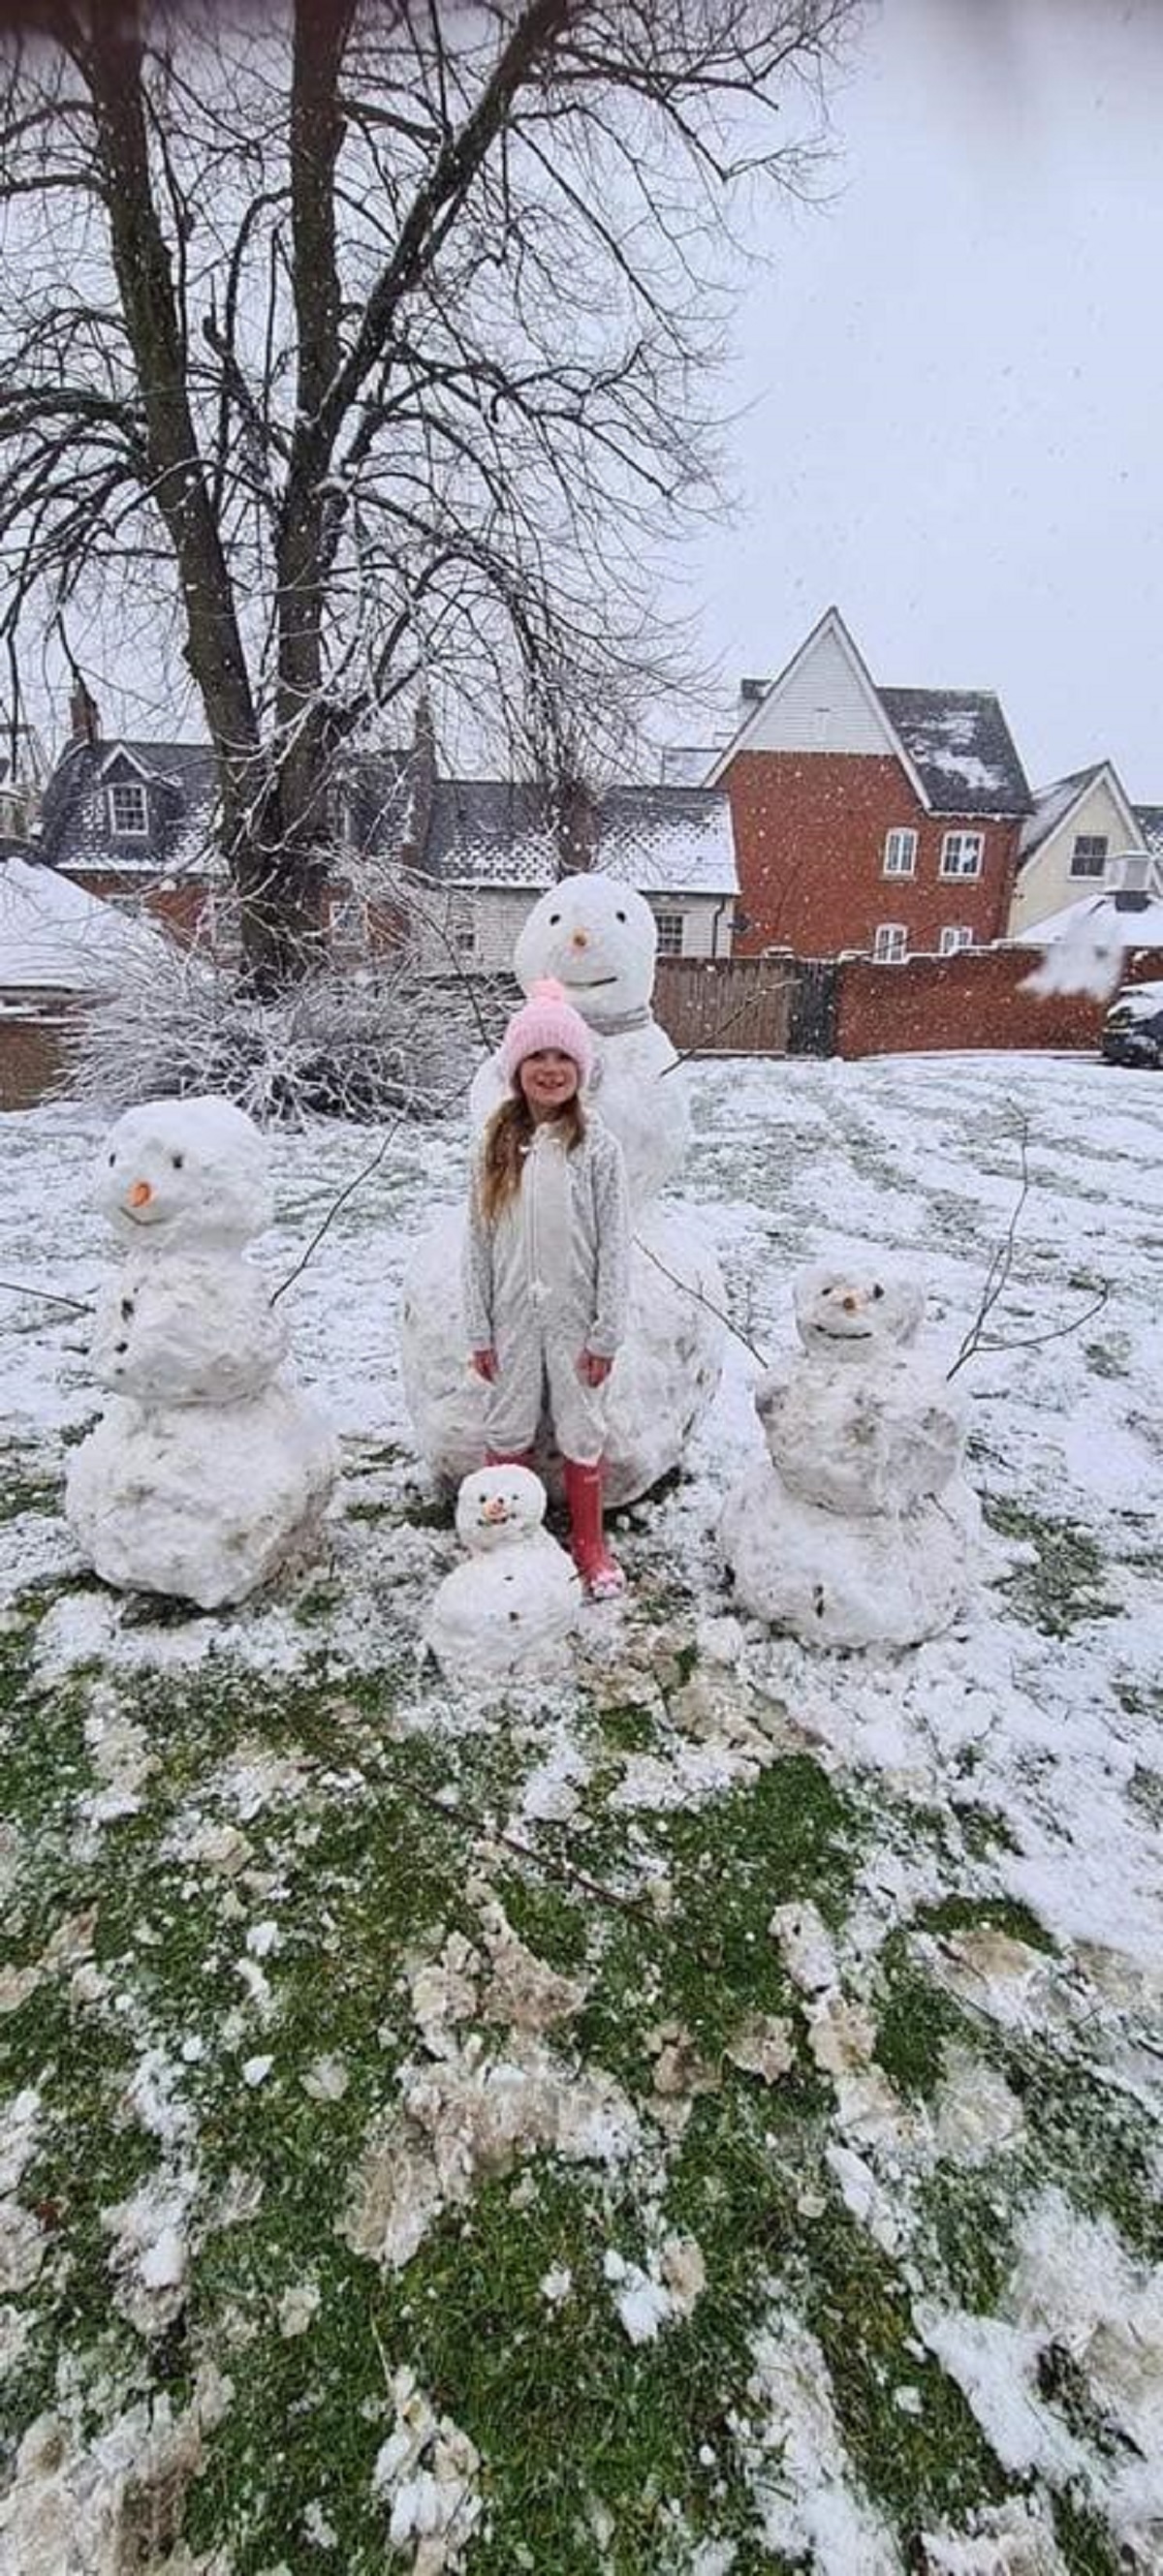 Icy what youve done there - the winner of the brigades snowman competition, XXXXX